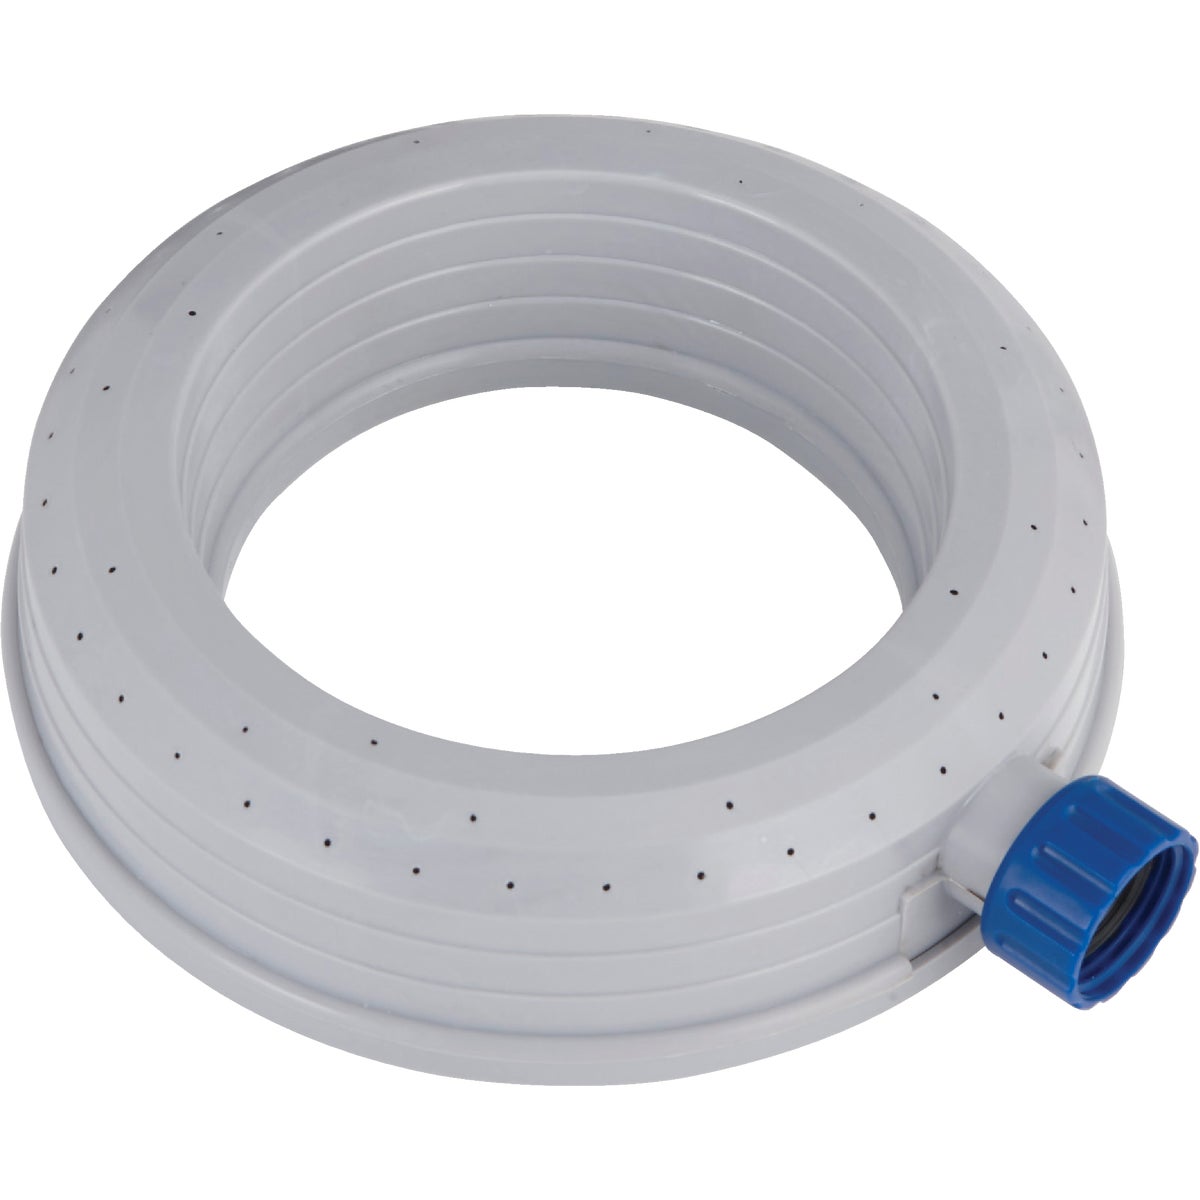 Item 724416, Poly ring sprinkler with swivel connection covers up to 900 Sq. Ft.